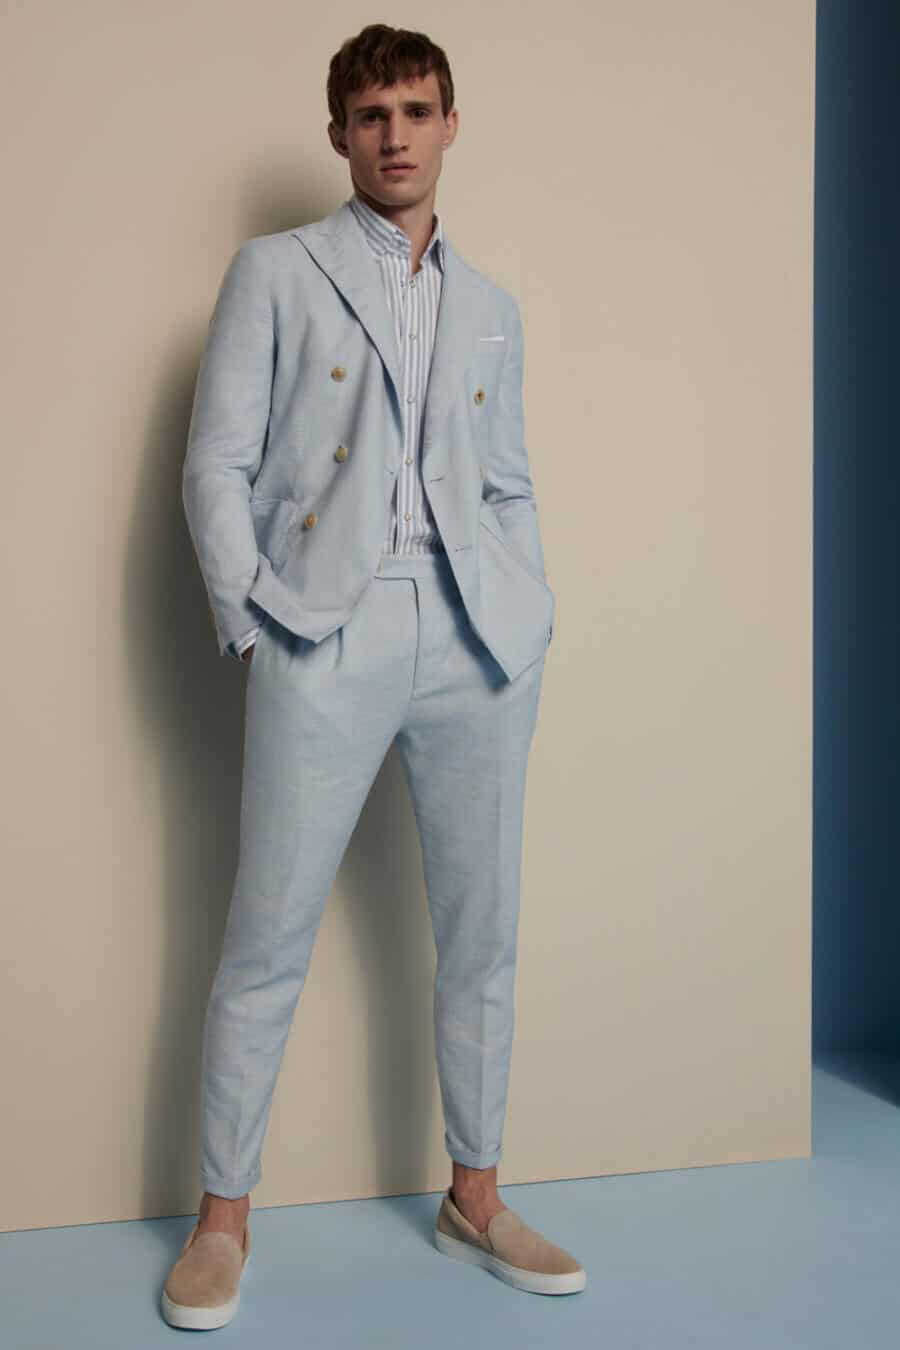 Men's pale blue linen suit outfit worn with slip on sneakers